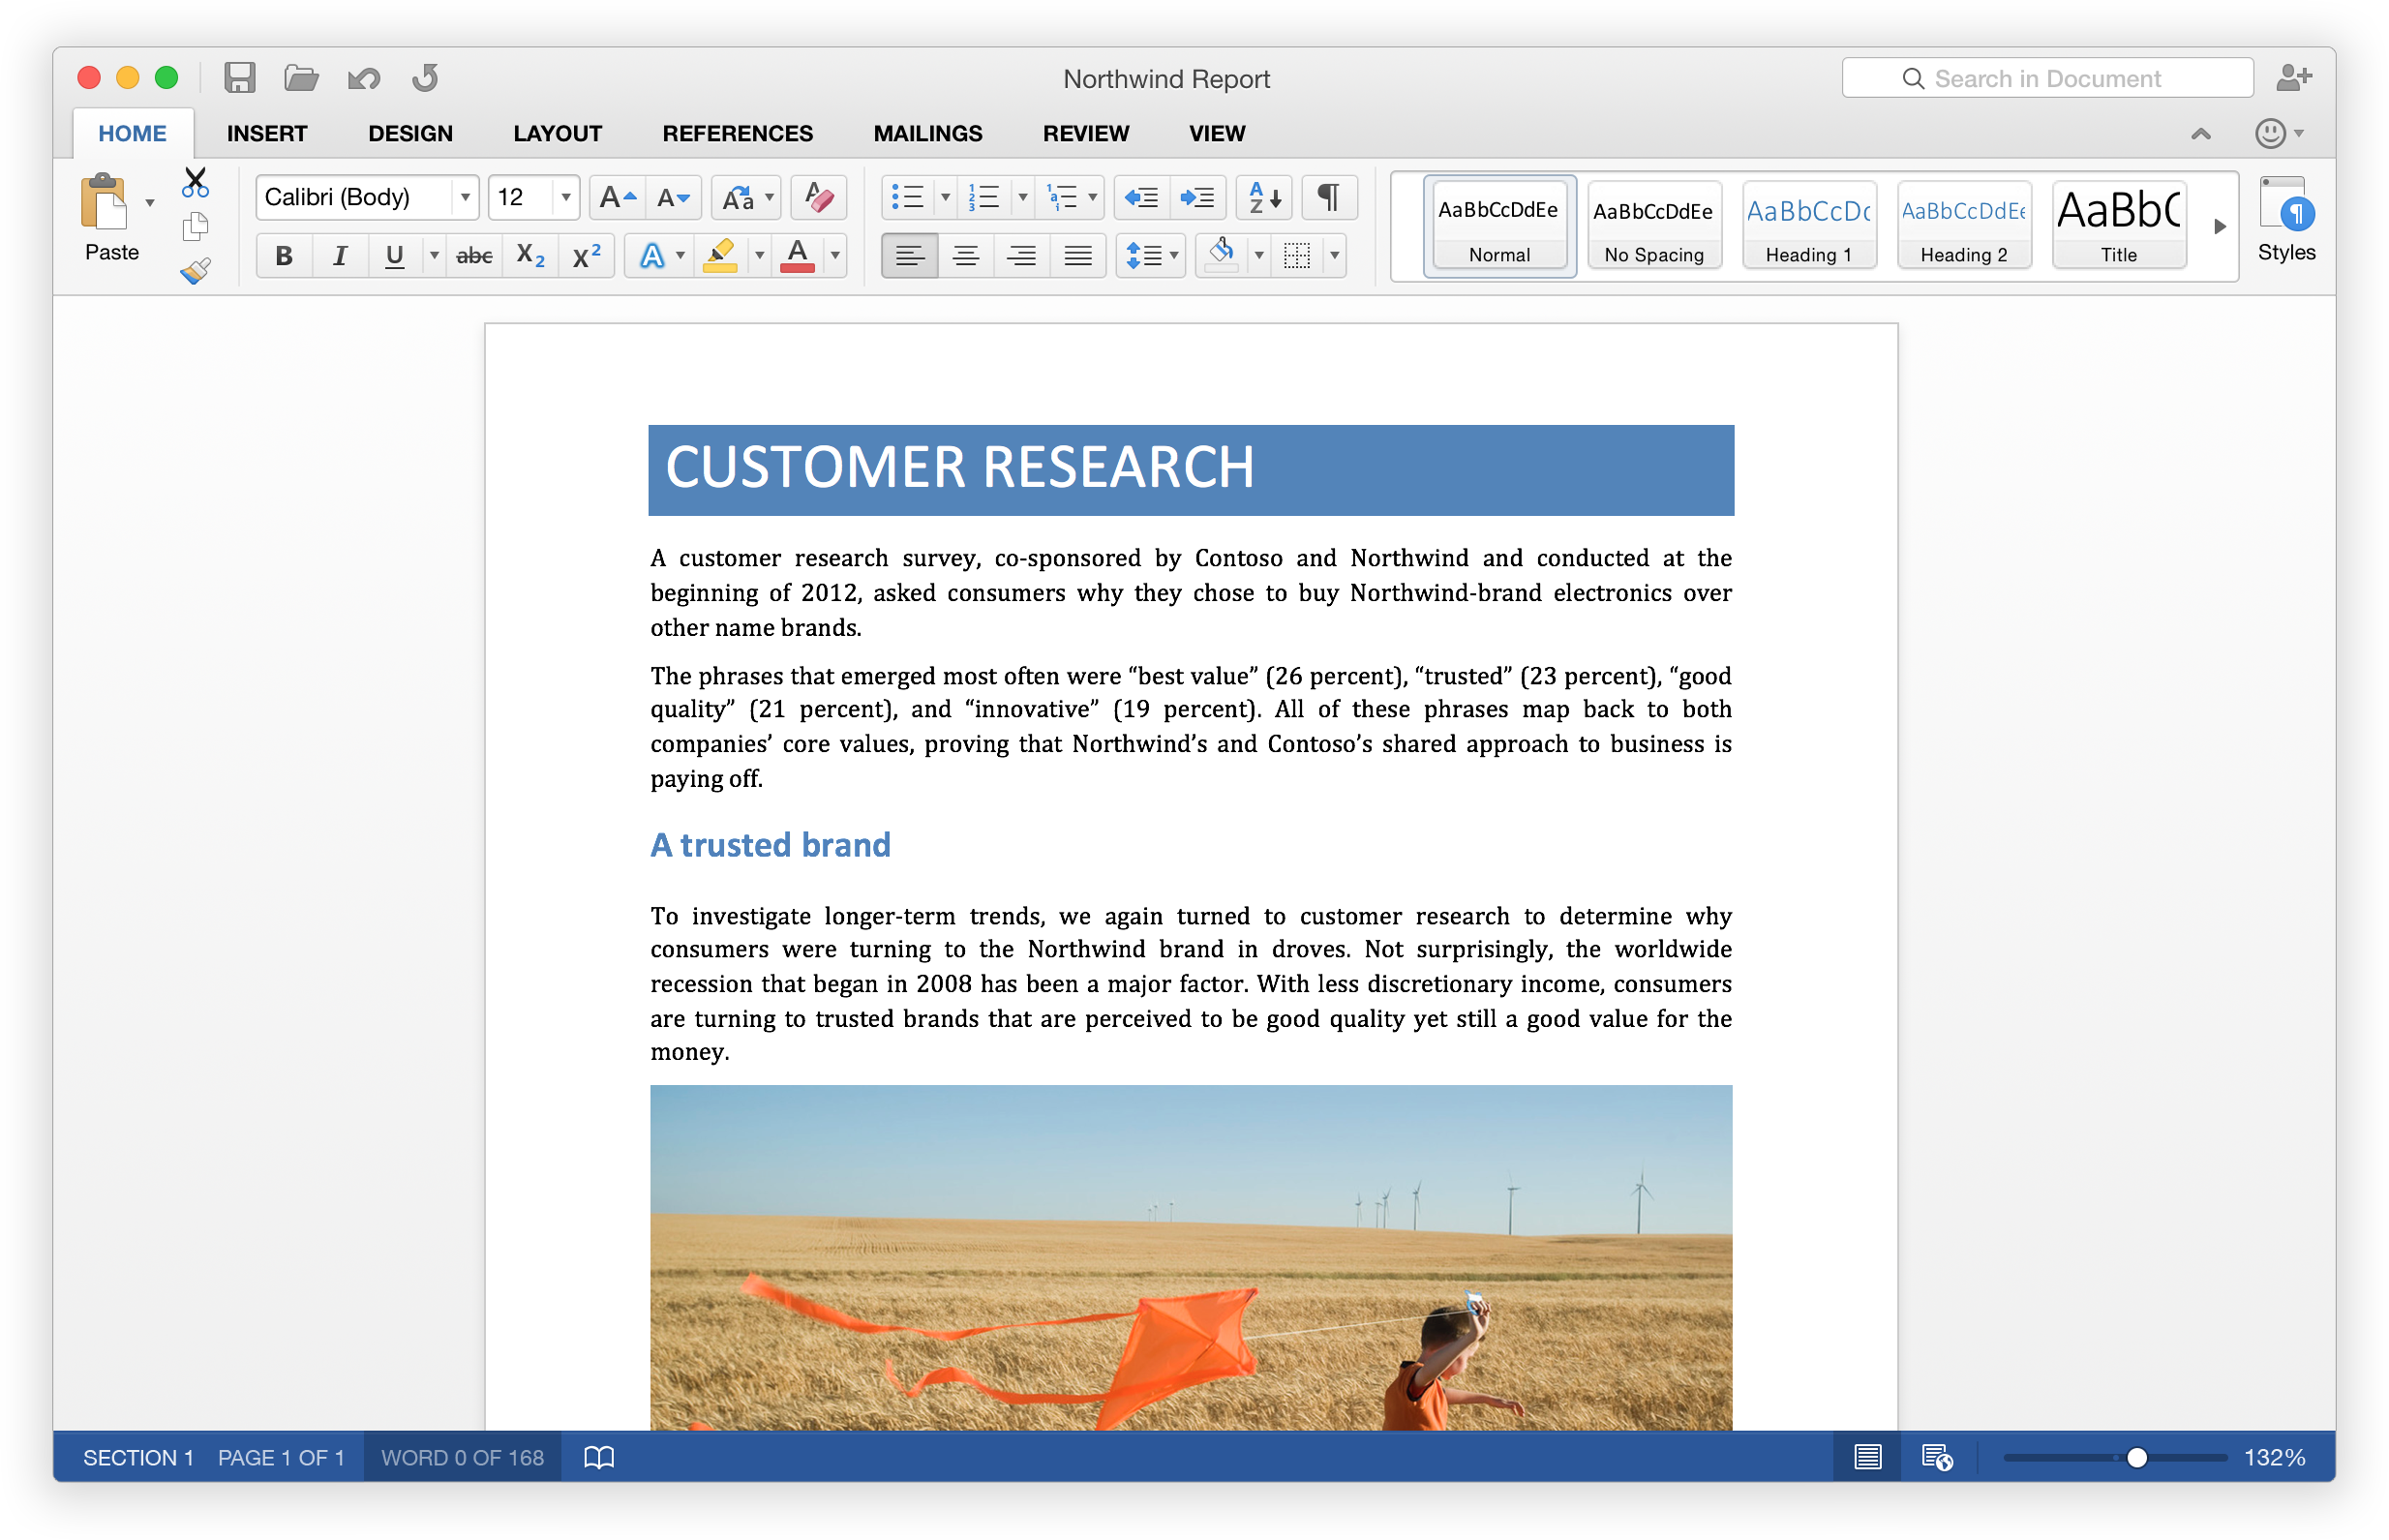 latest version of microsoft office for mac